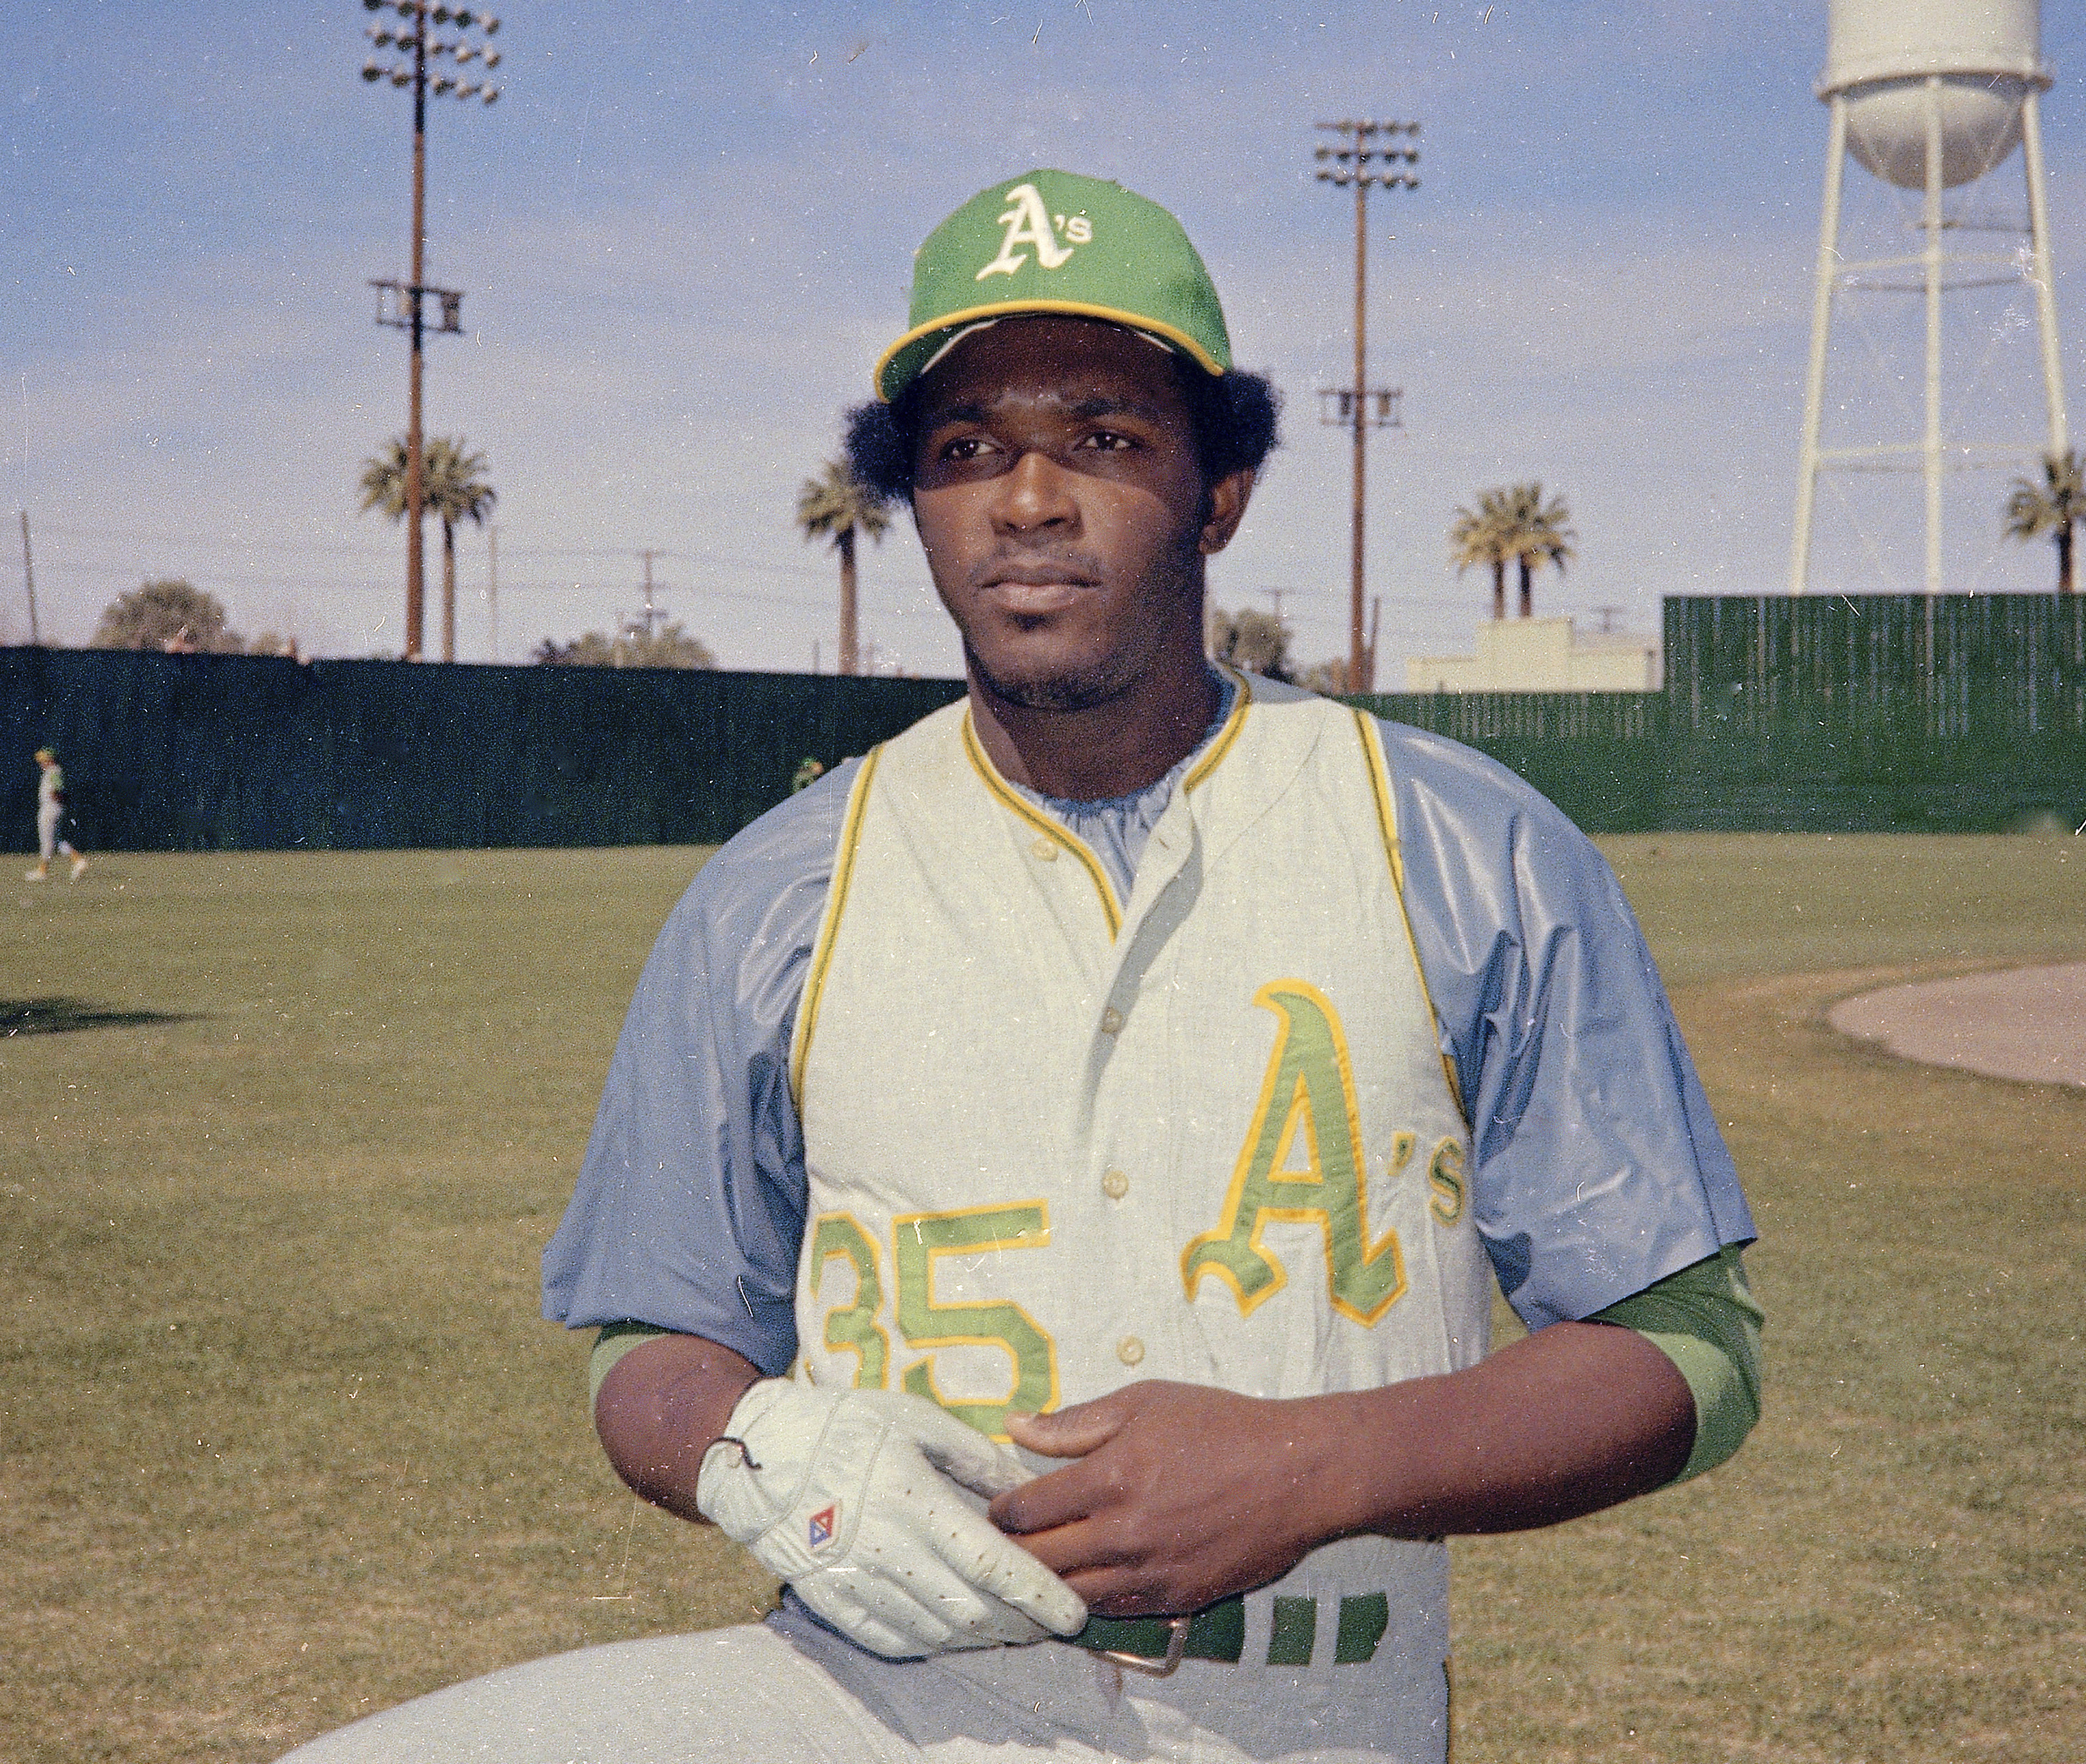 Who is the best Oakland A's player not in the Hall of Fame